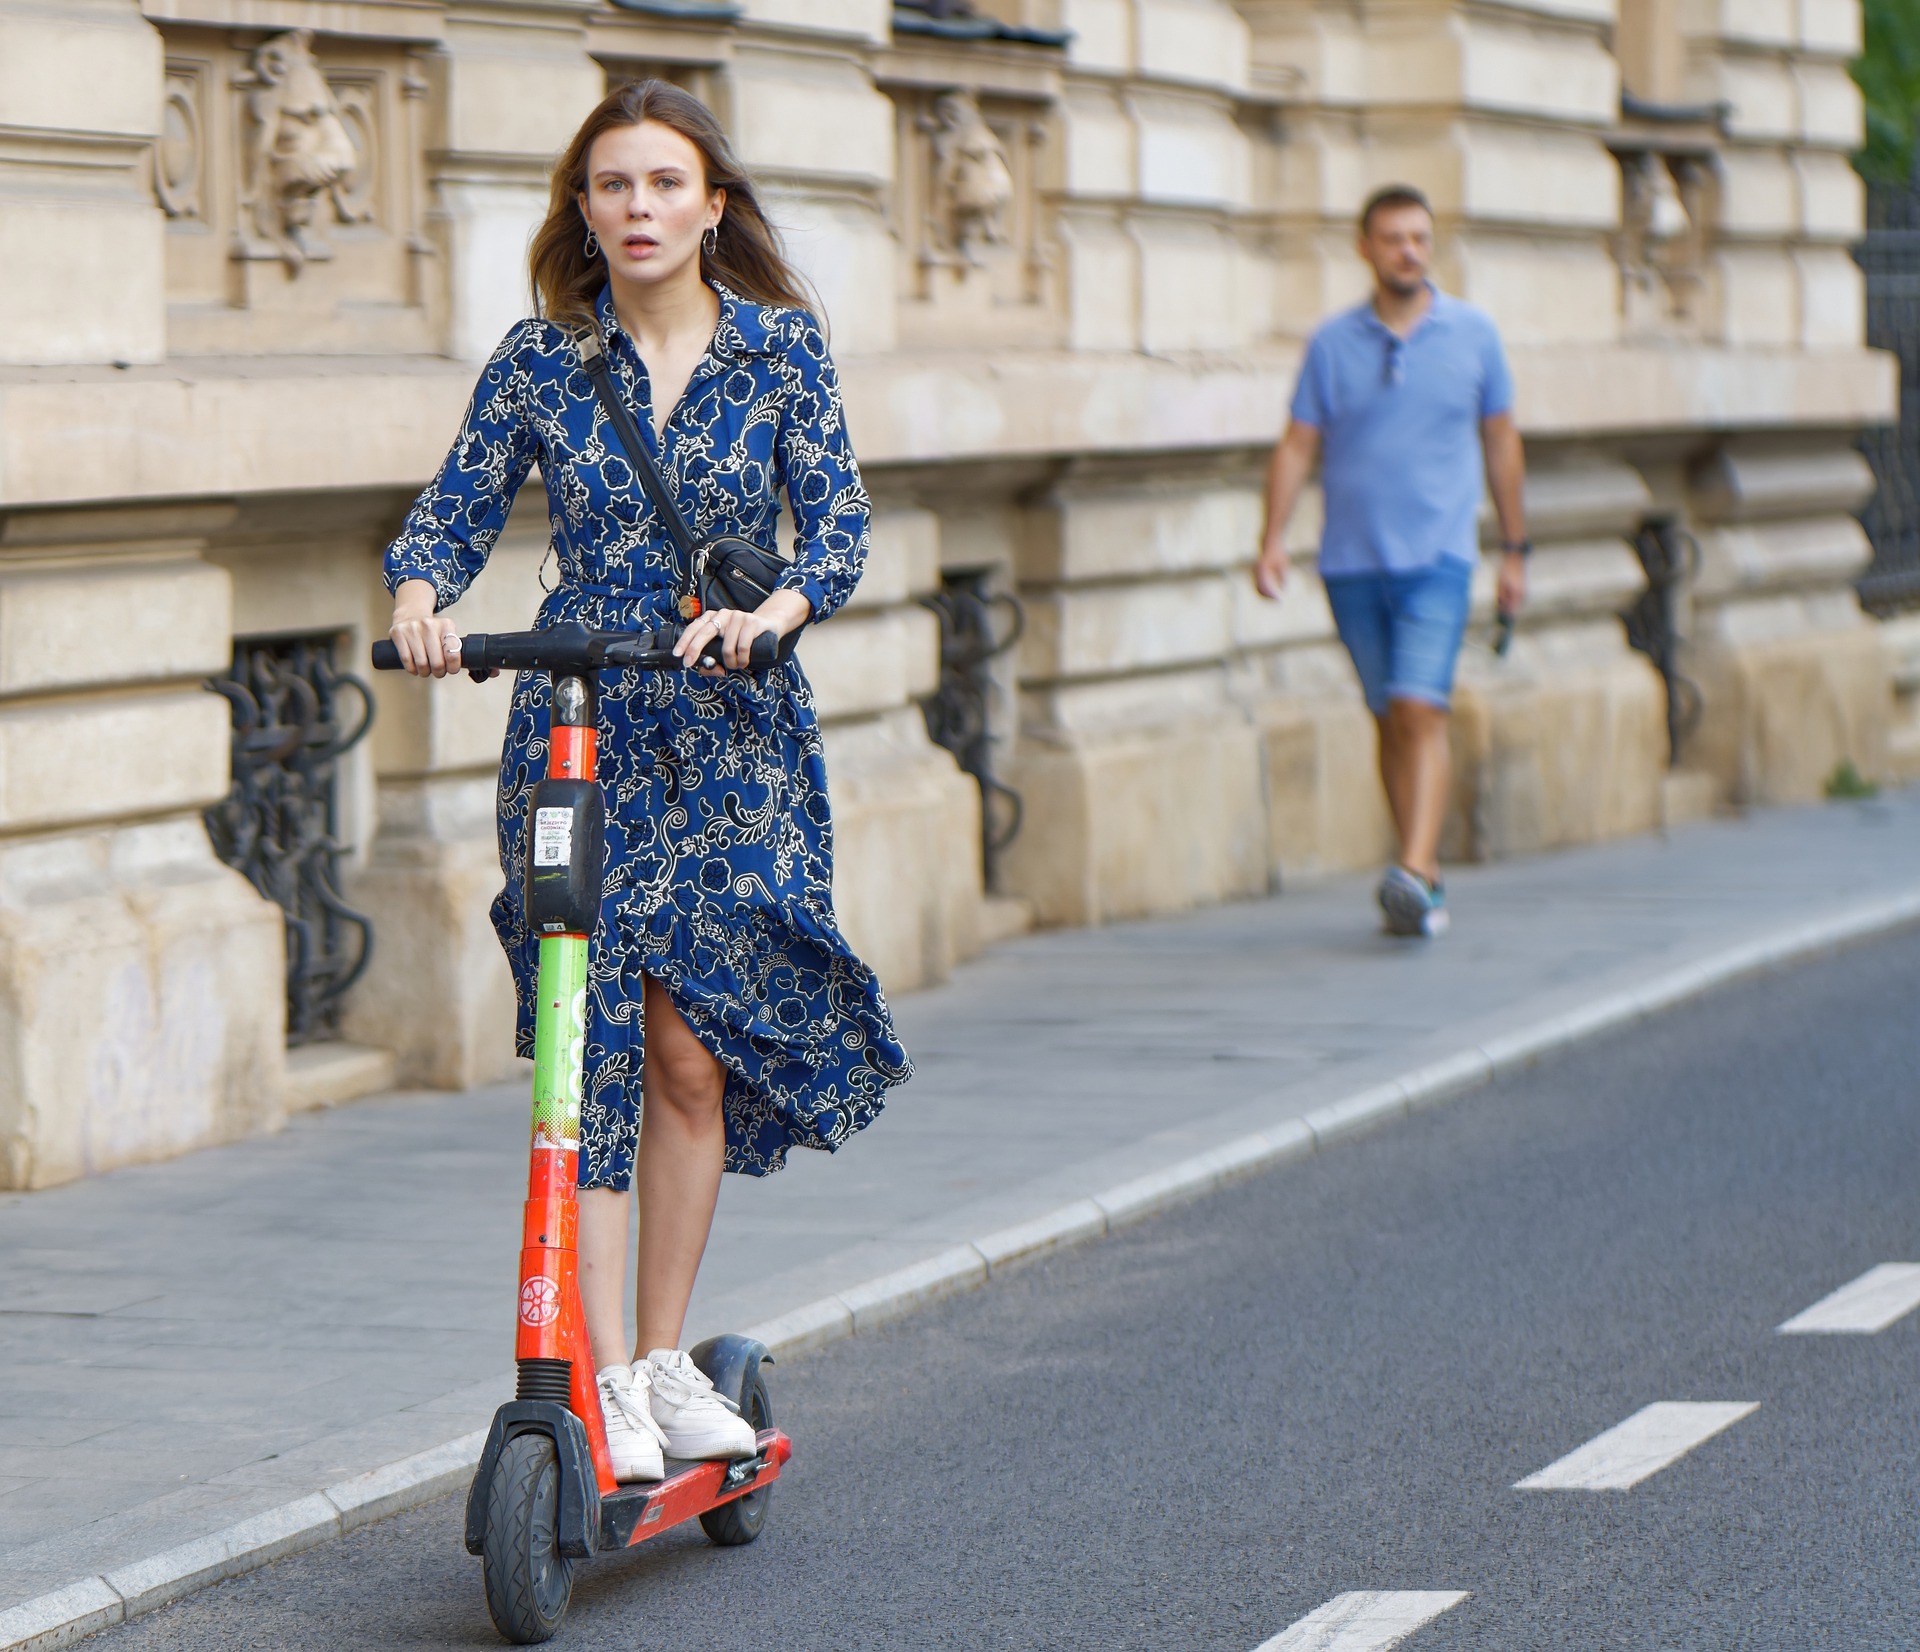 Are Electric Scooters a Good Way to Travel in Cities?